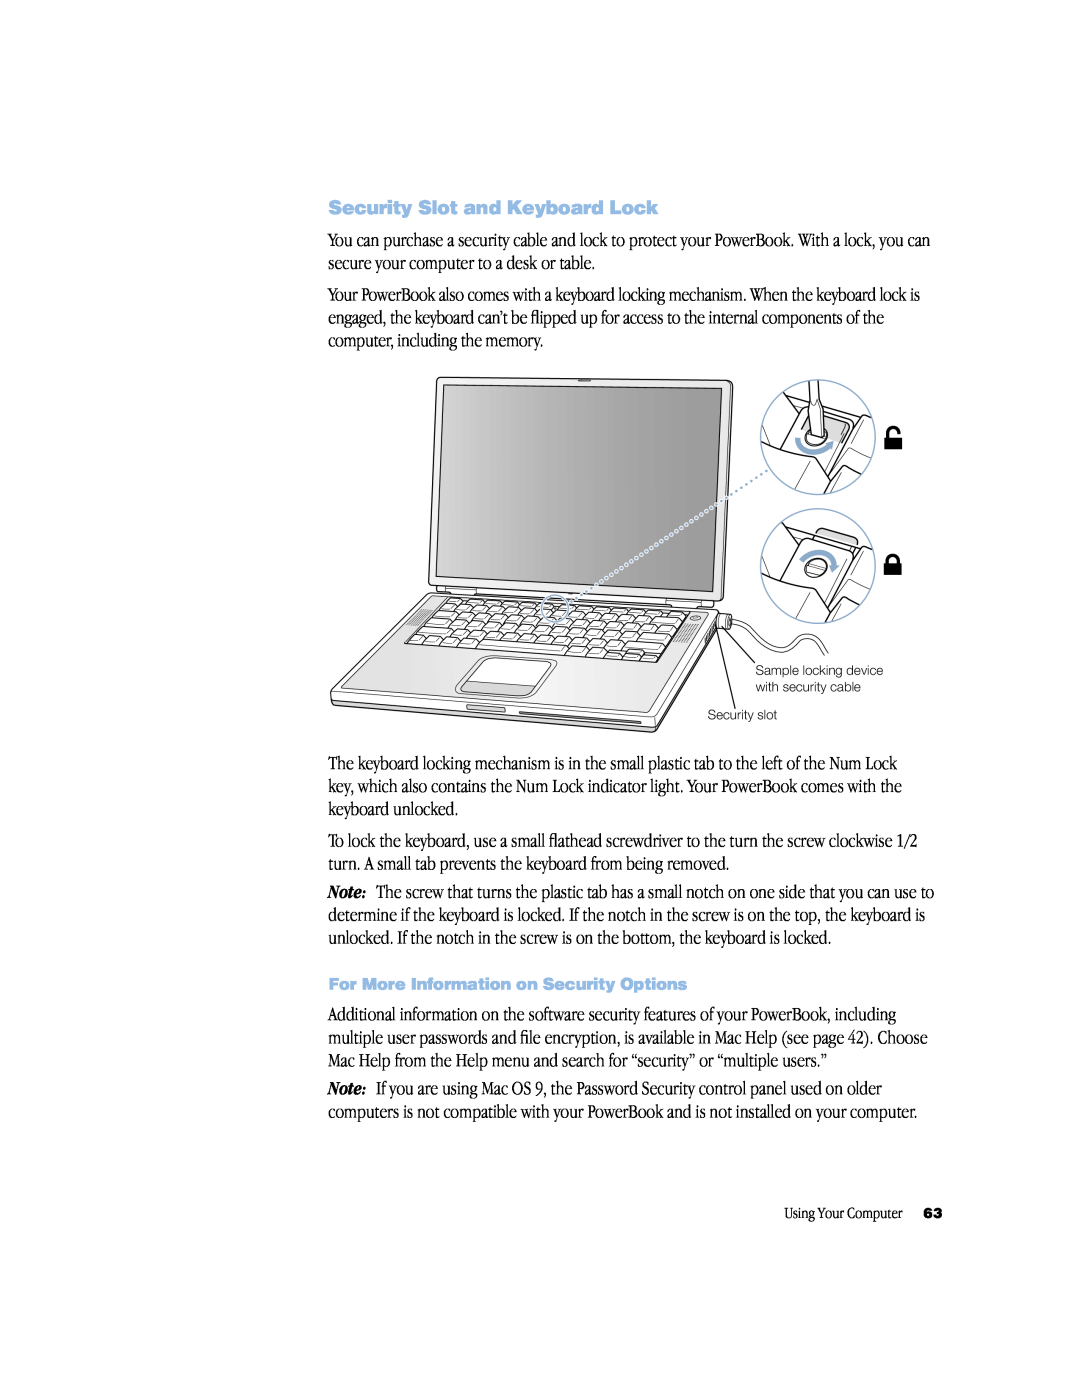 Apple powerbook g4 manual Security Slot and Keyboard Lock, For More Information on Security Options 